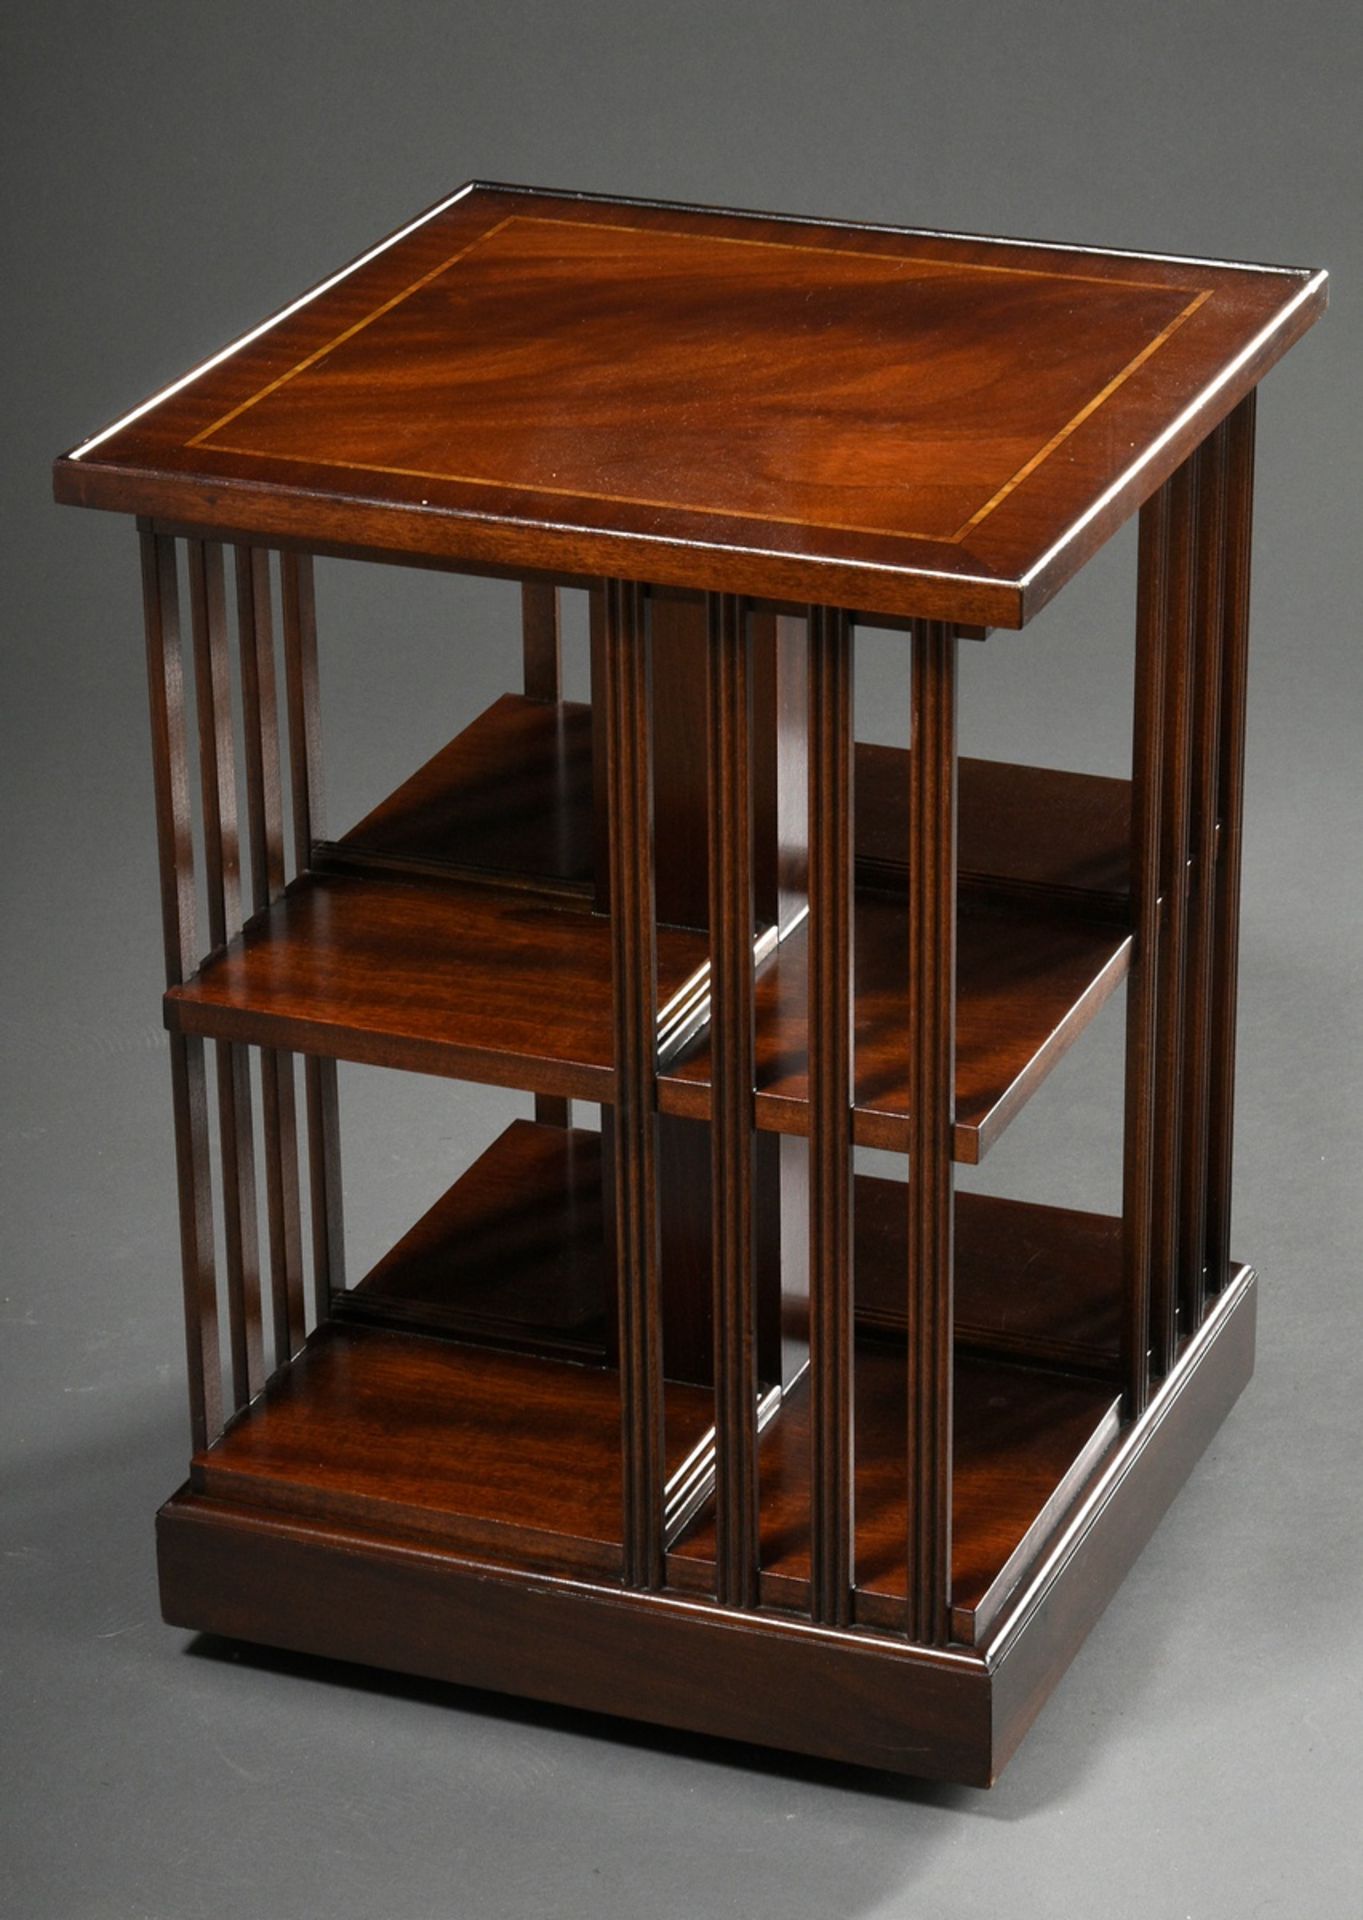 English revolving bookcase in mahogany with ribbon inlays, can be loaded from all sides, around 190